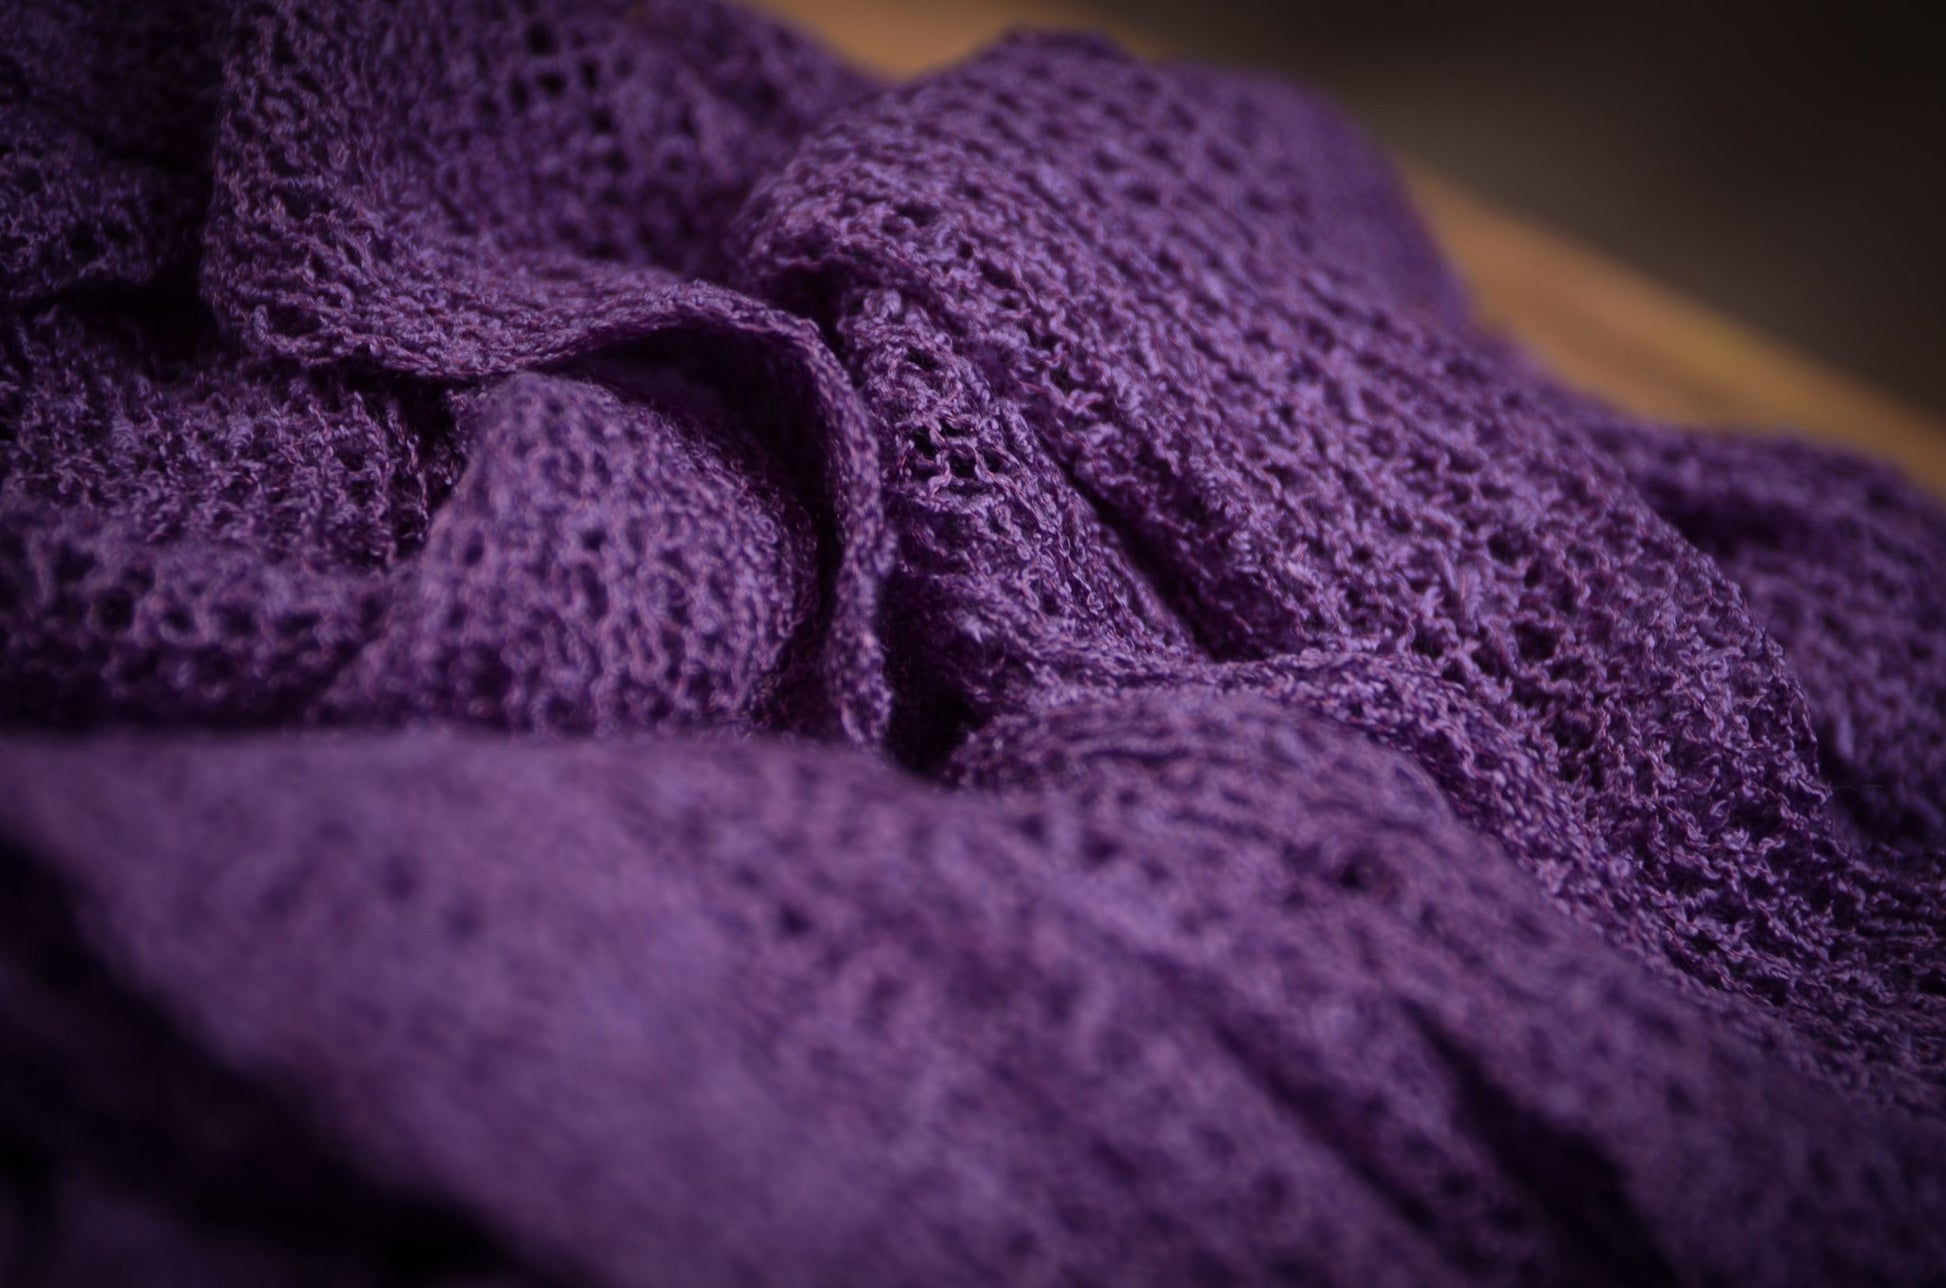 Stretch Knit Baby Wrap - Violet-Newborn Photography Props